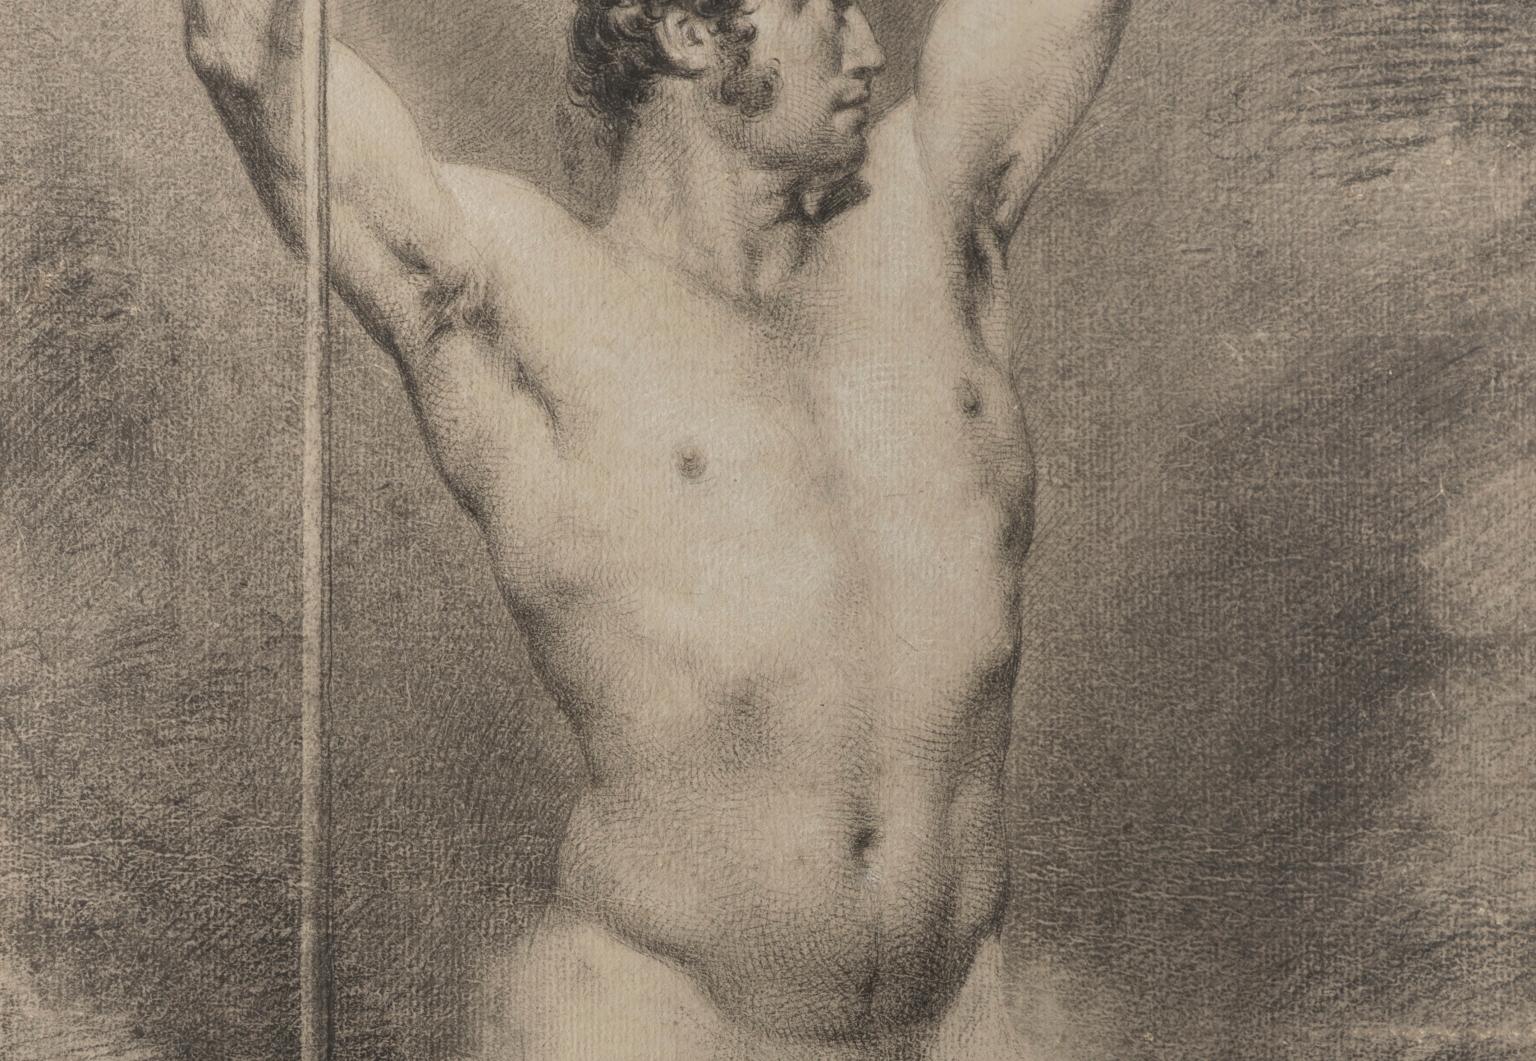 Placido Fabris Male Nude Portrait Drawings 1830s charcoal tempera laid paper For Sale 4